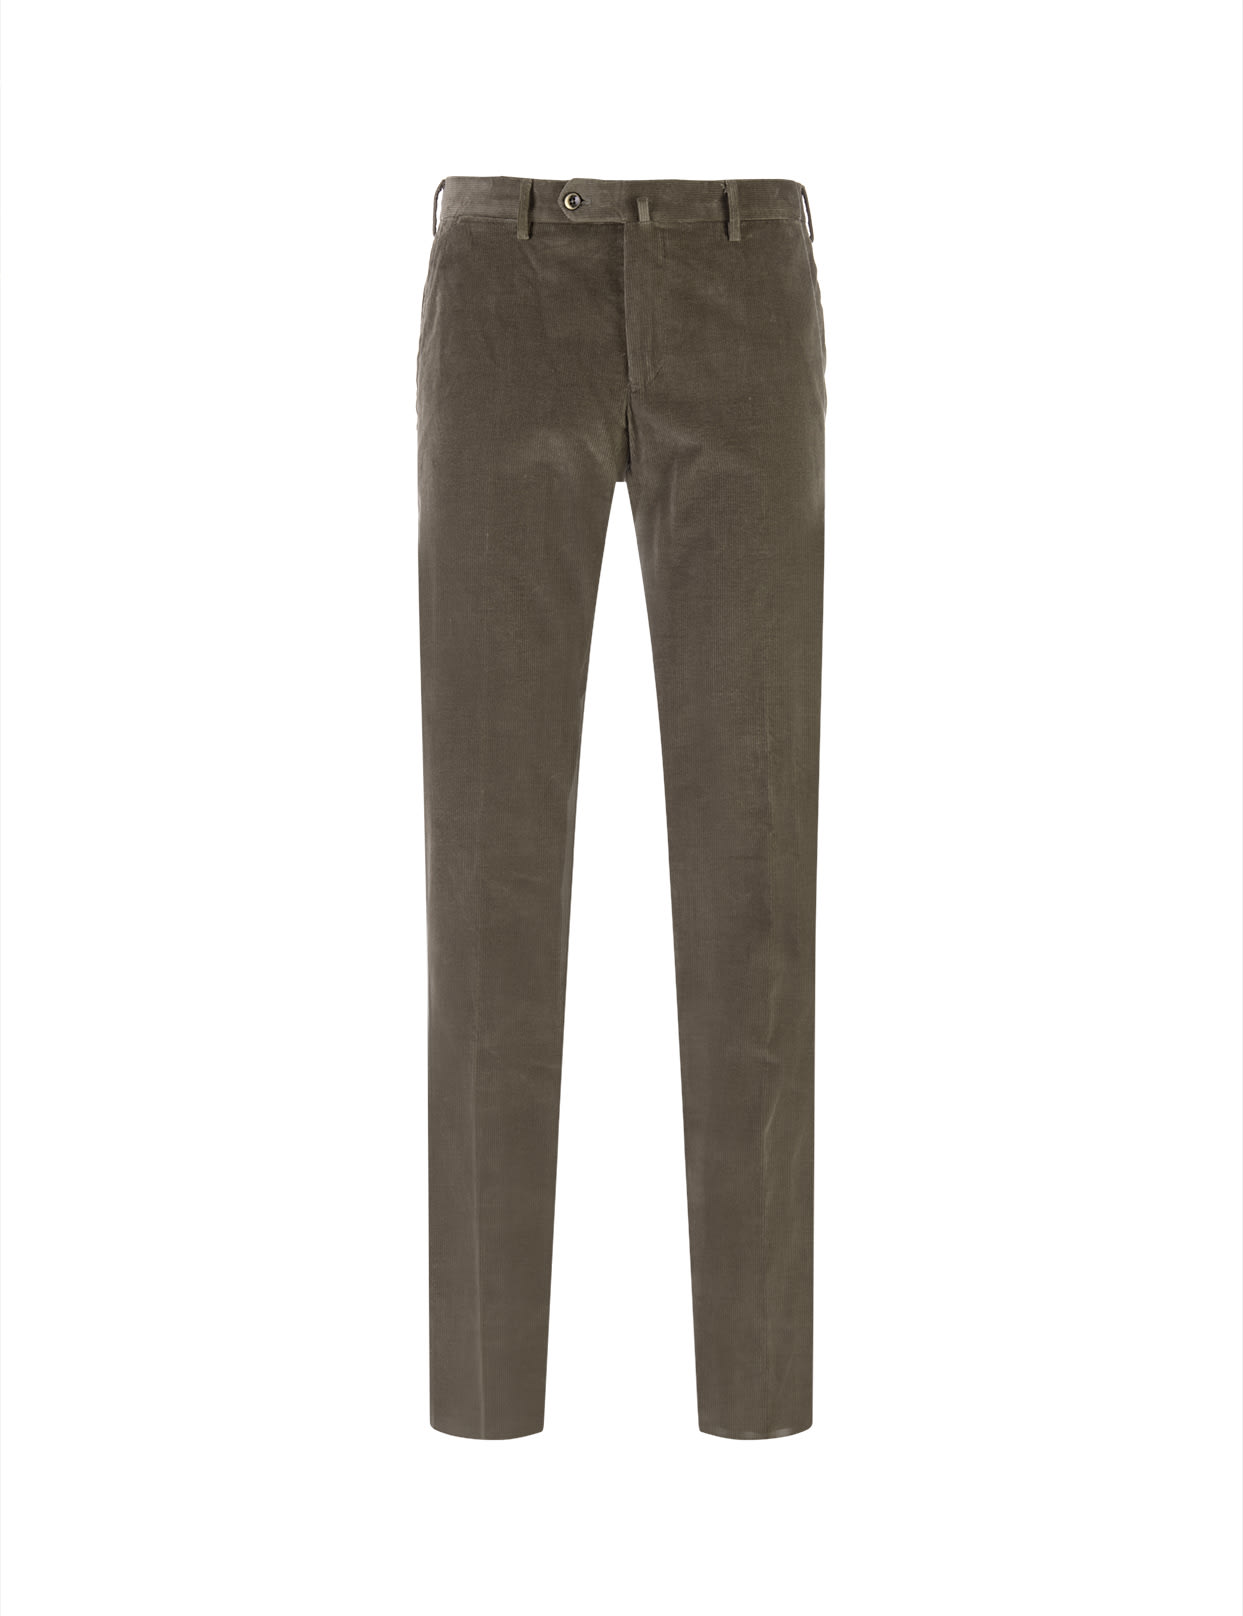 PT01 Man Slim Fit Trousers In Olive Green Corduroy